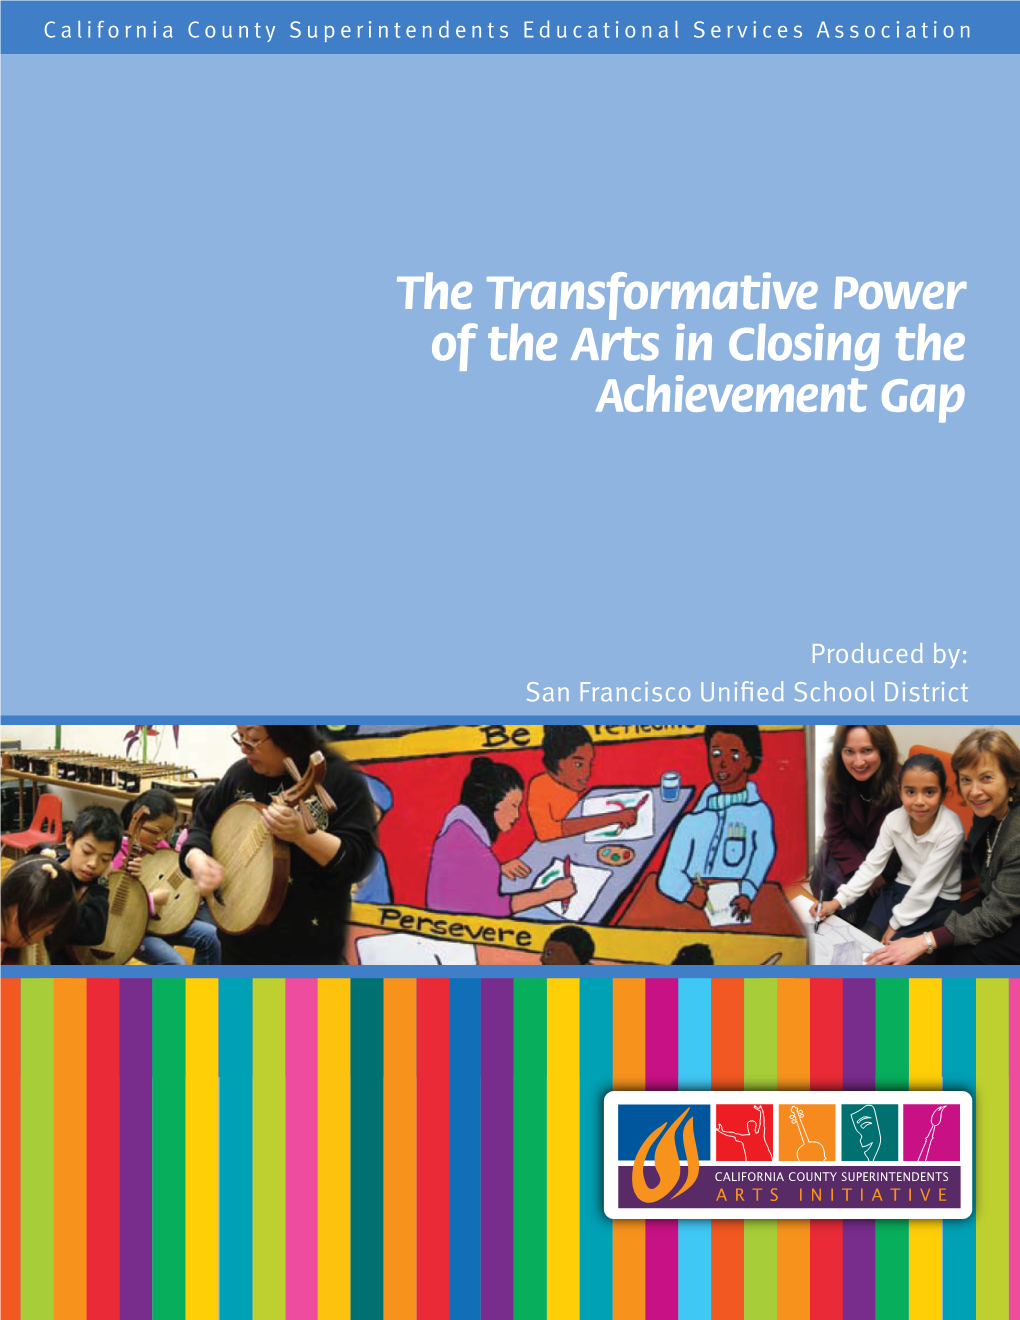 The Transformative Power of the Arts in Closing the Achievement Gap